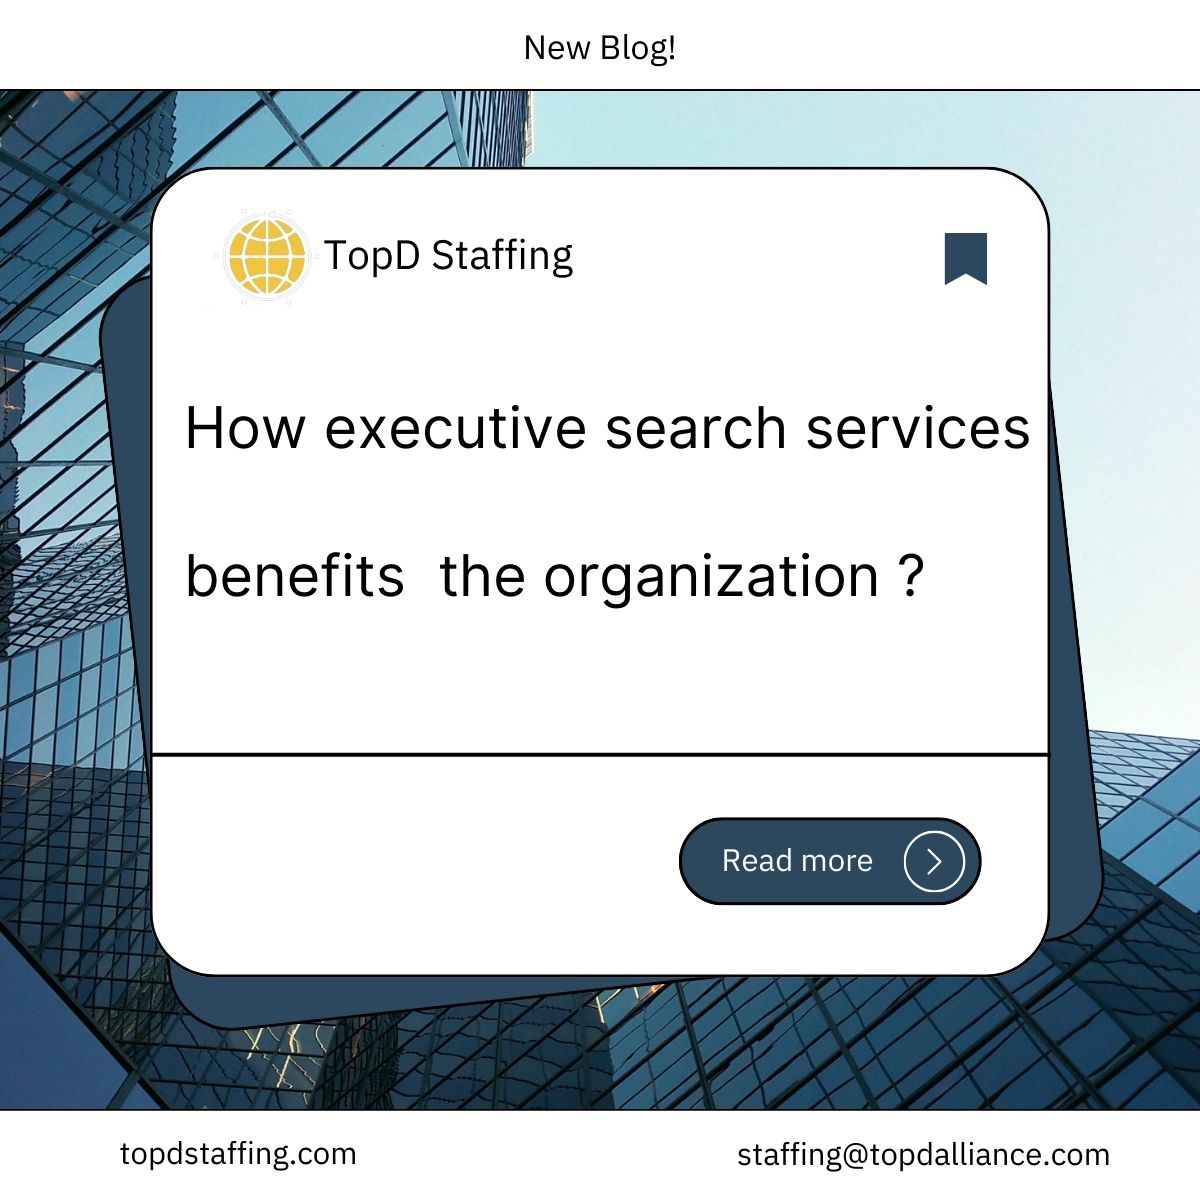 9 Benefits of Using Executive Search Services for Your Organization